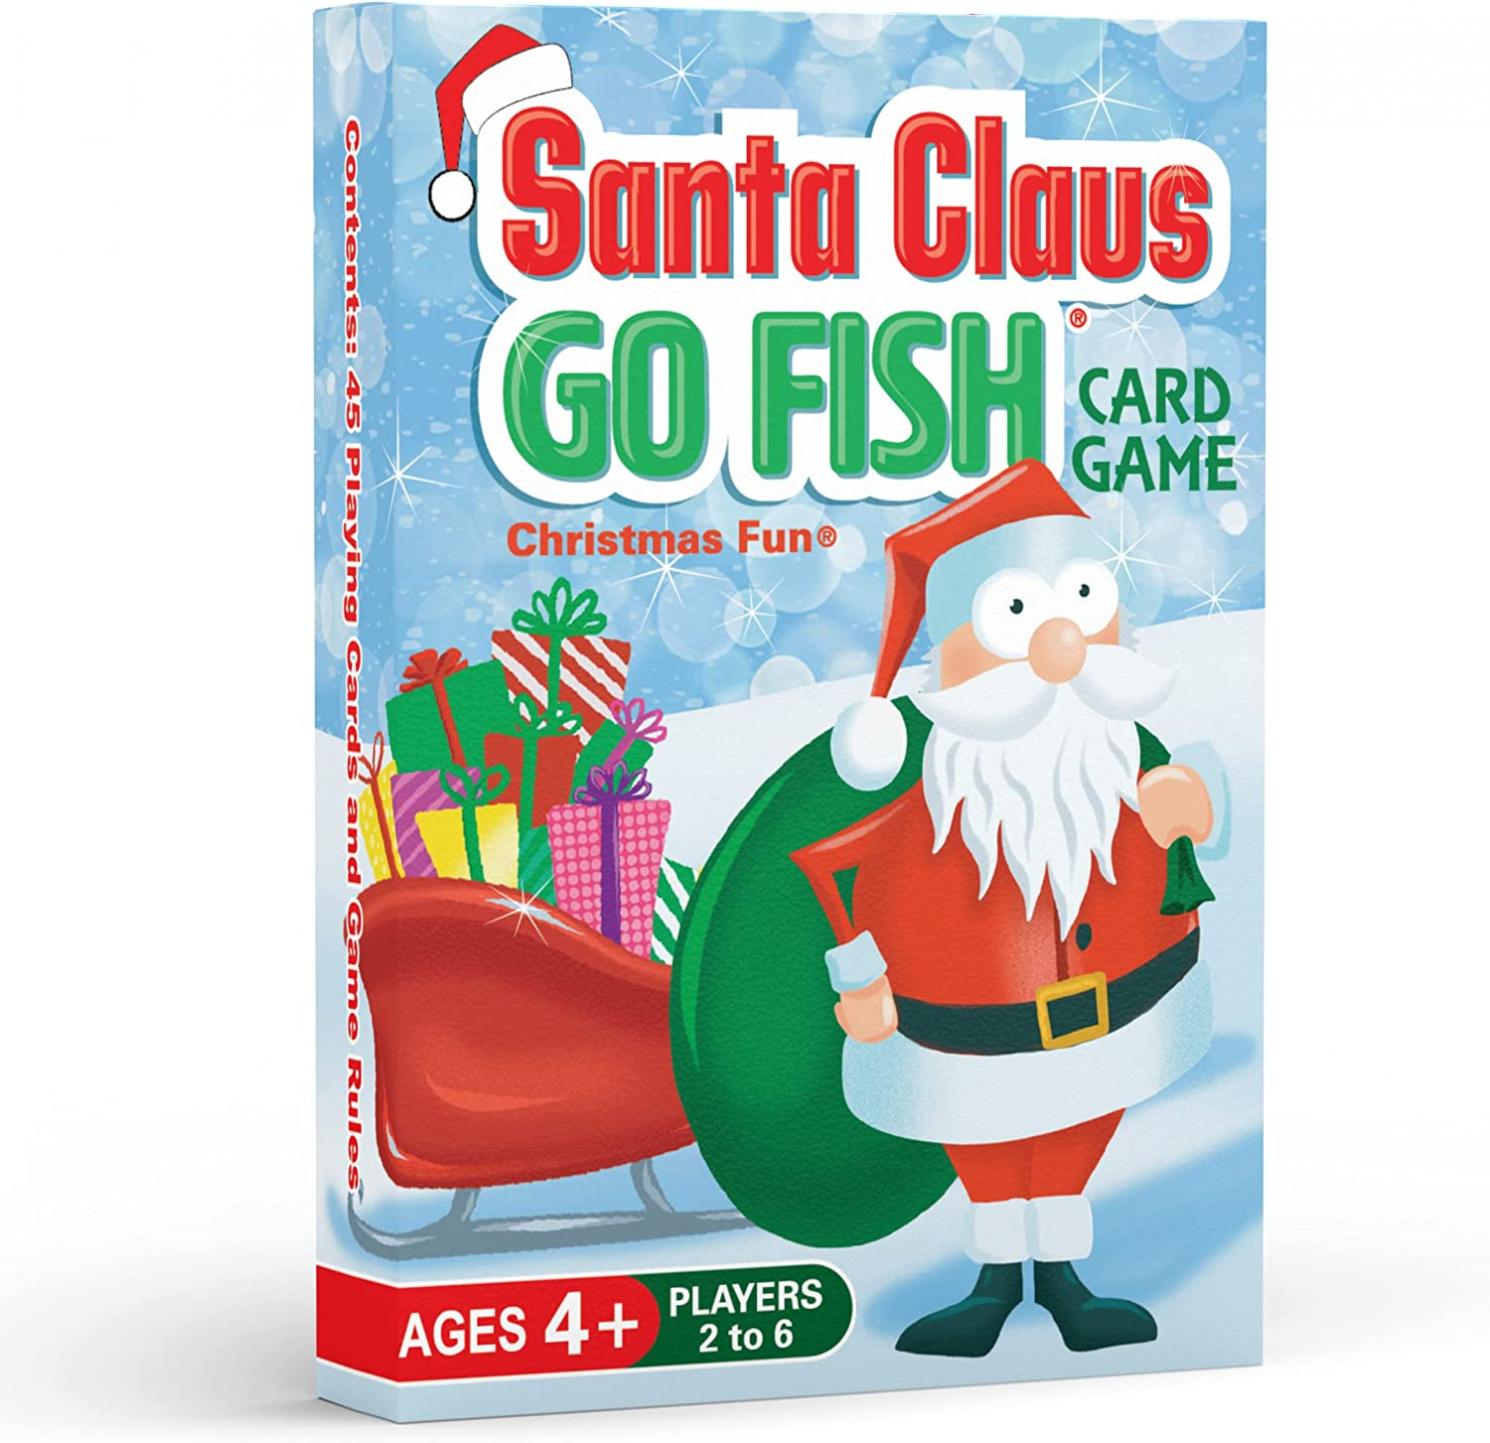 Santa Claus GO Fish - Play 3 Fun Christmas Games for Kids Ages 4-8 Using ONE Holiday Themed Deck (GO Fish, Old Maid & Slap Jack) - A Great Gift or Stocking Stuffers for Kids – Beautifully Illustrated